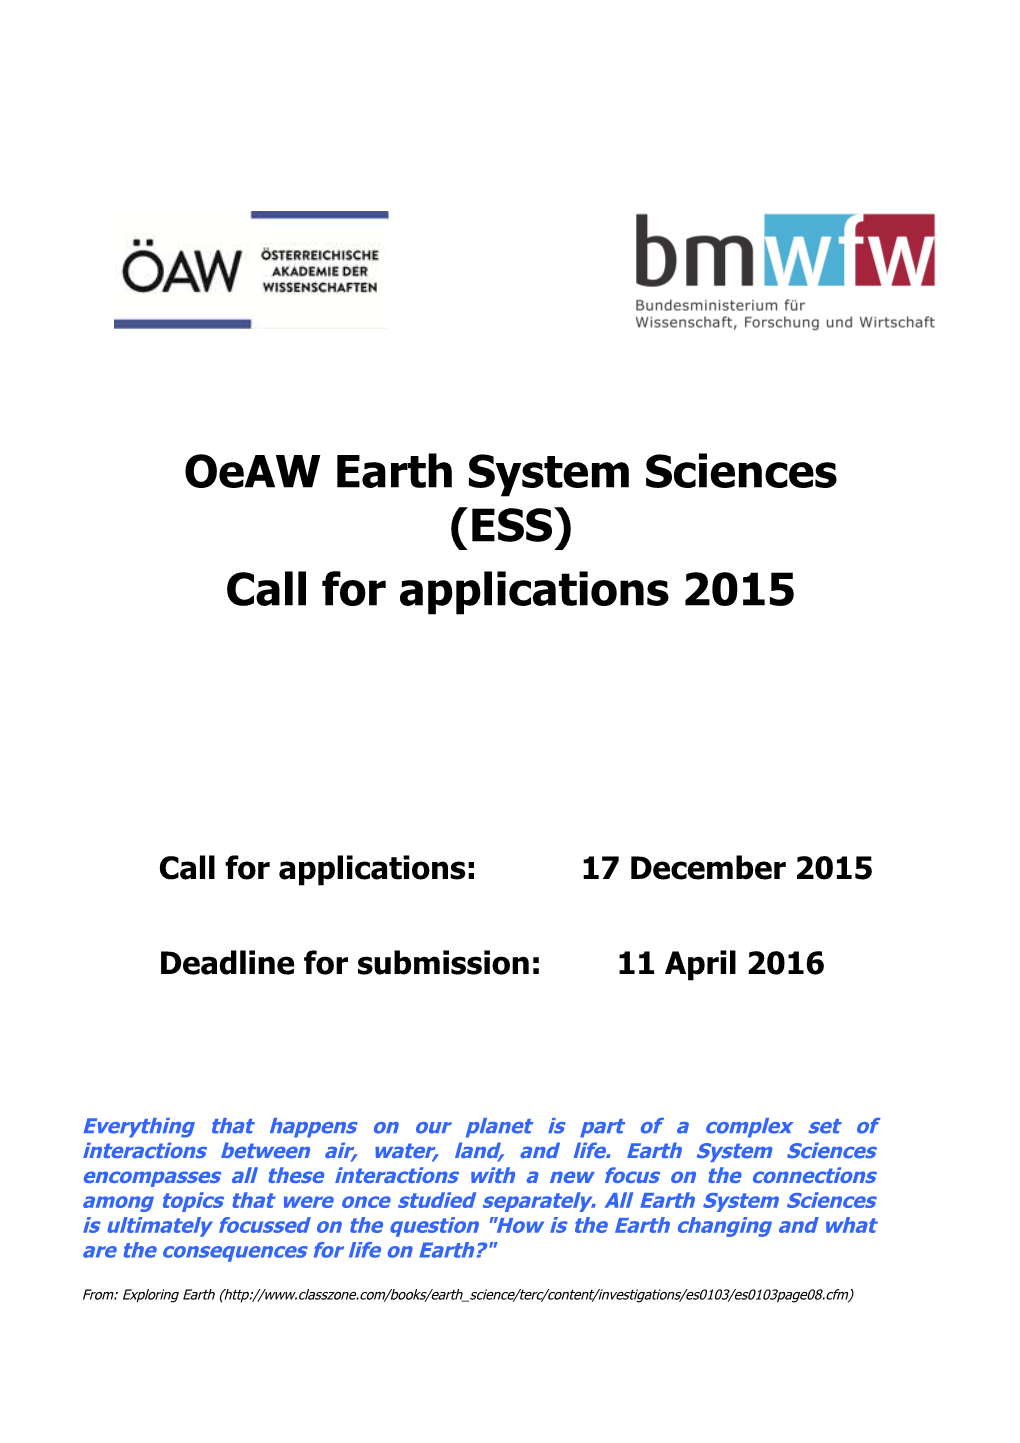 Oeaw Earth System Sciences (ESS)